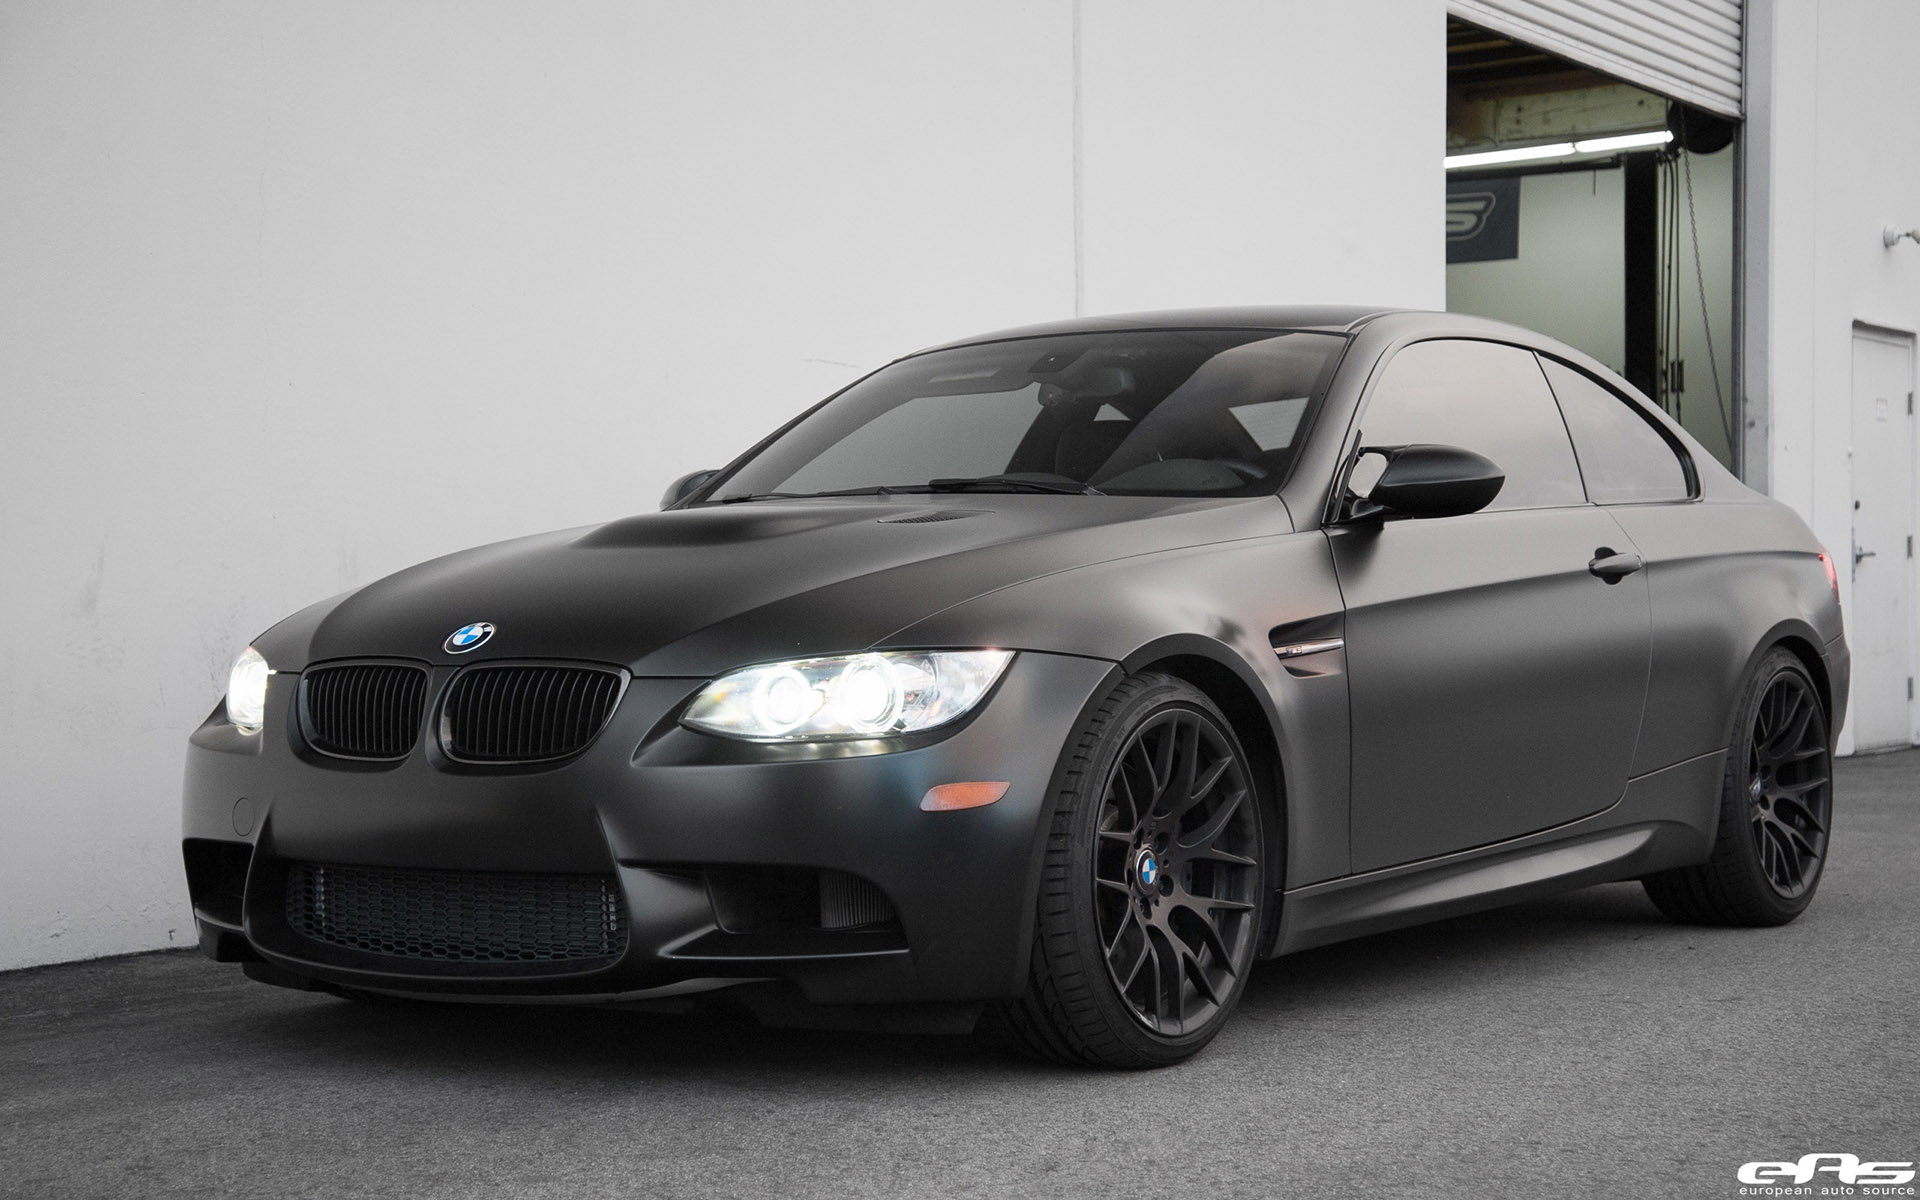 EAS Reveals Amazing Project with Matte Black BMW E92 M3 Supercharged - BMW.SG